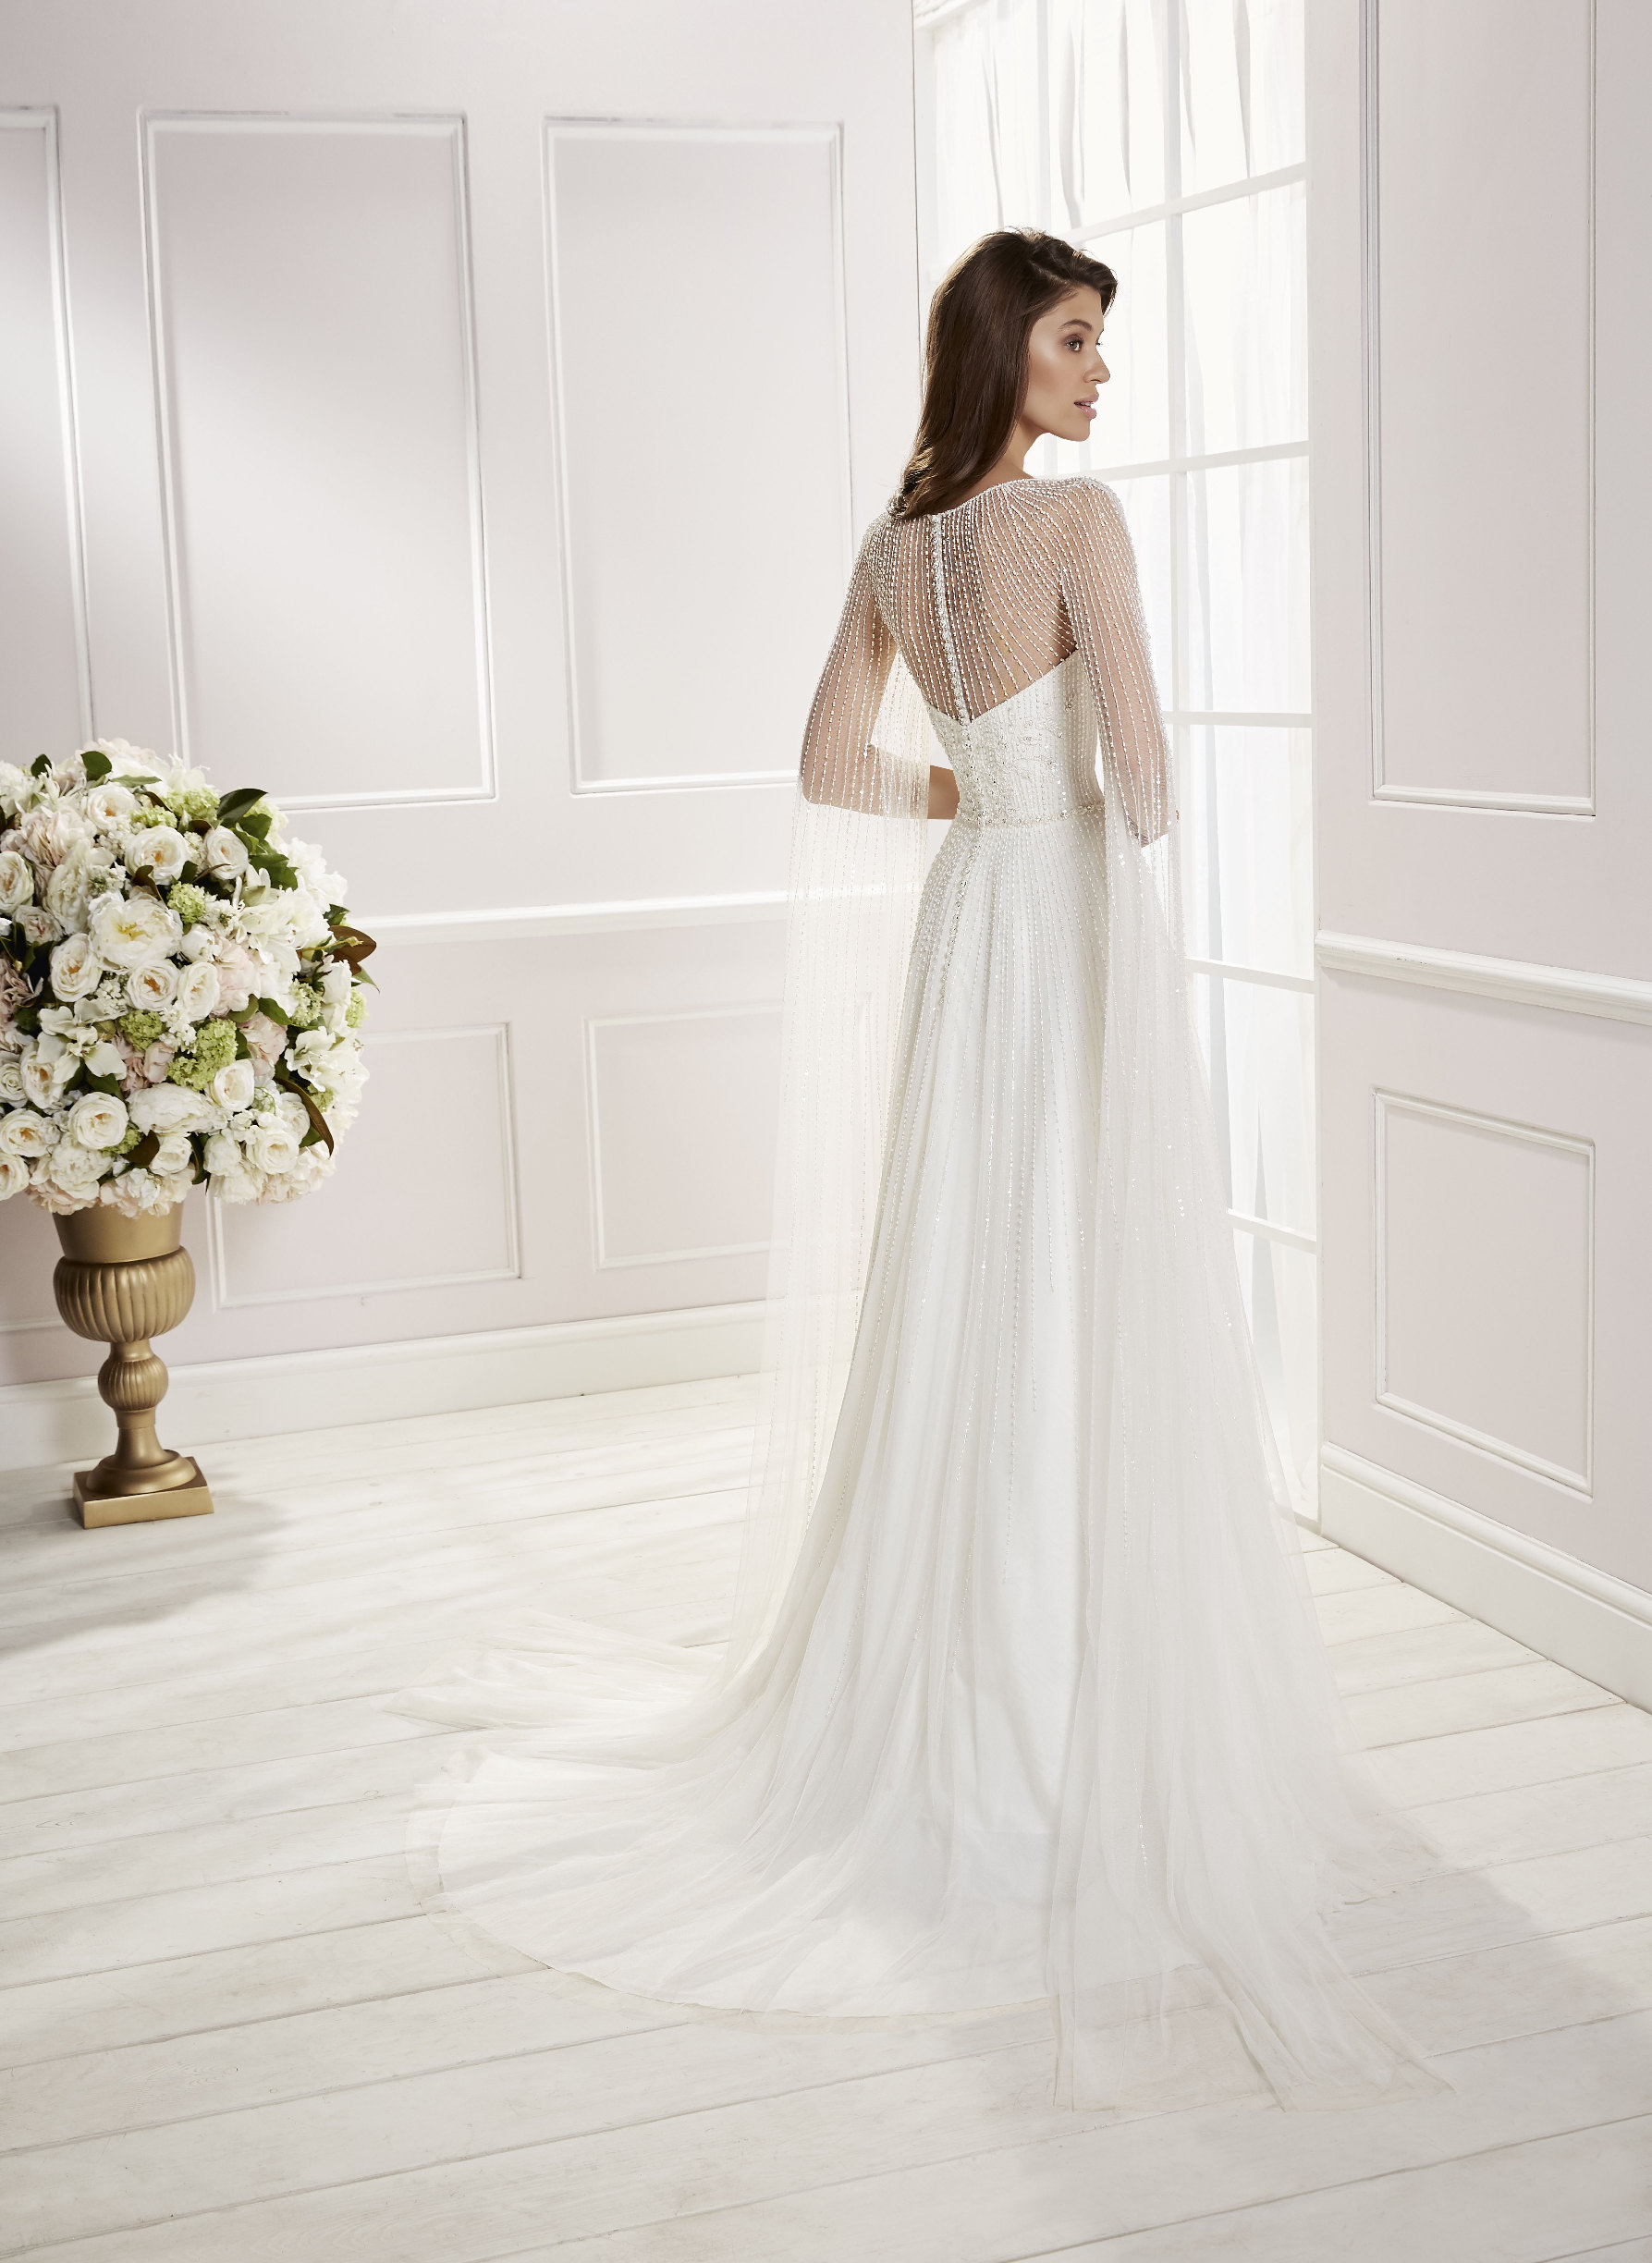 Back image of brunette woman standing in front of a window wearing beaded a-line wedding dress with back bridal button detail